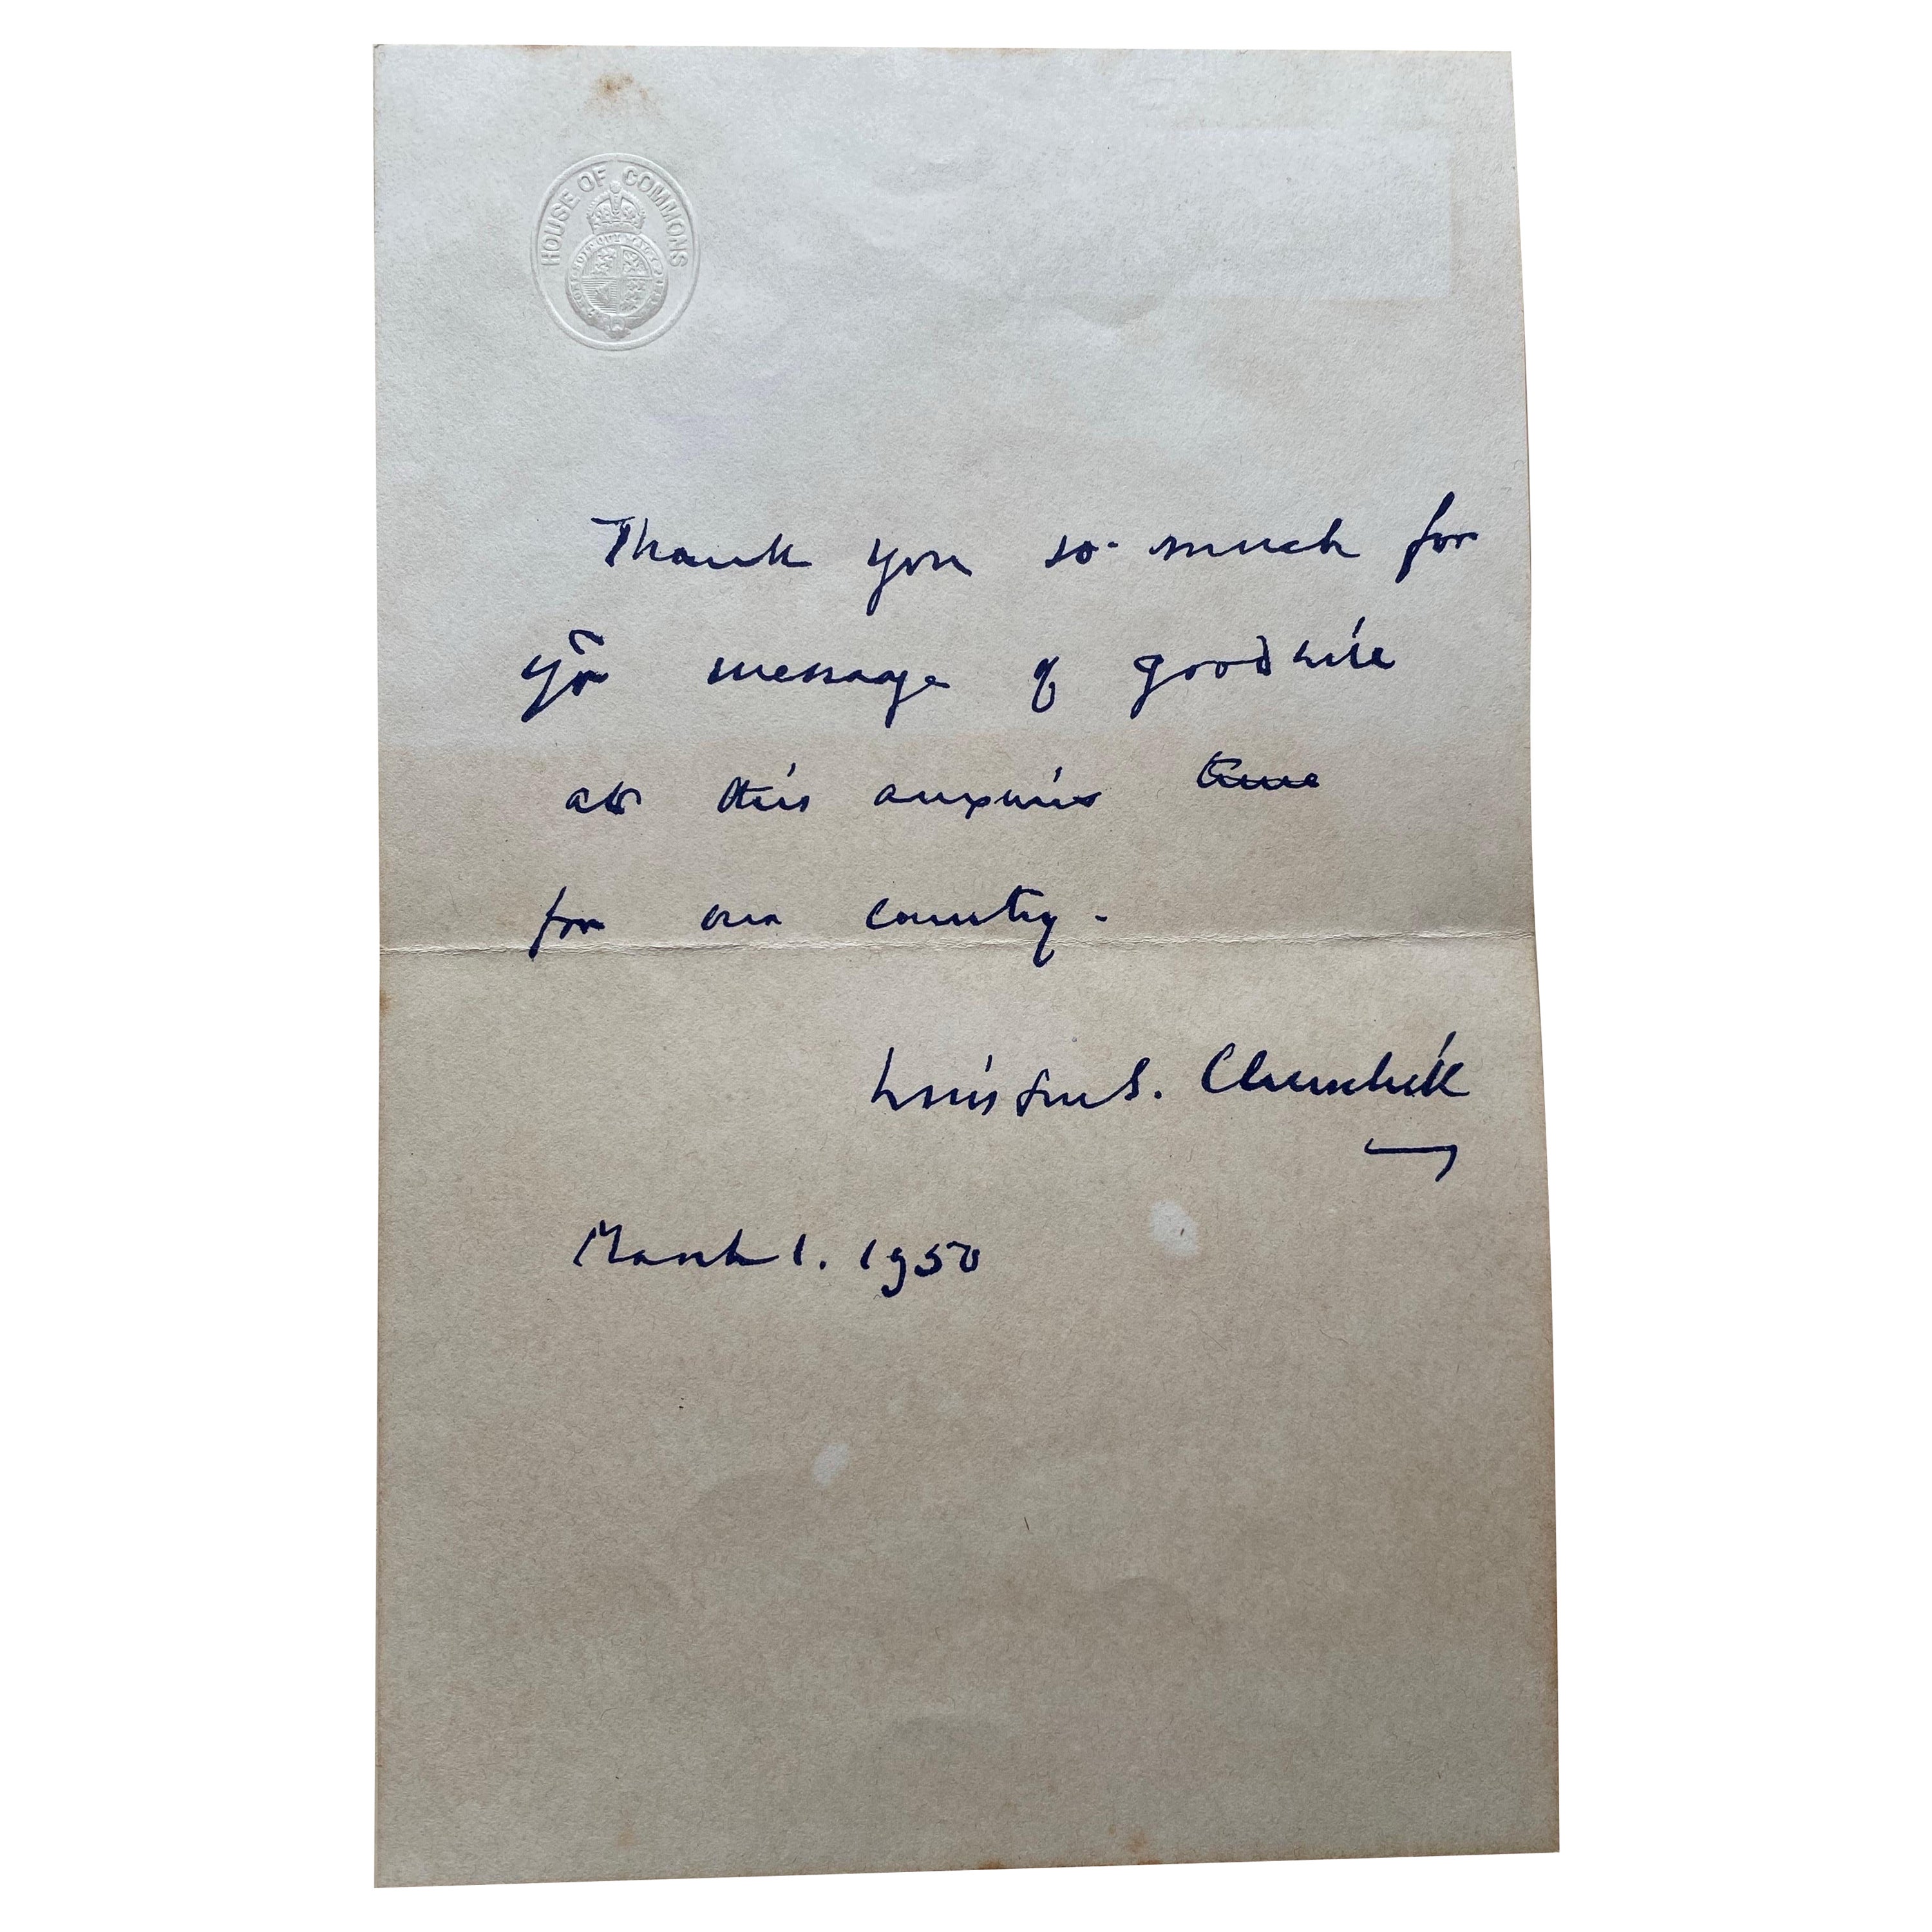 Signed, Handwritten Letter from Winston Churchill dated 1950 with Envelope. For Sale